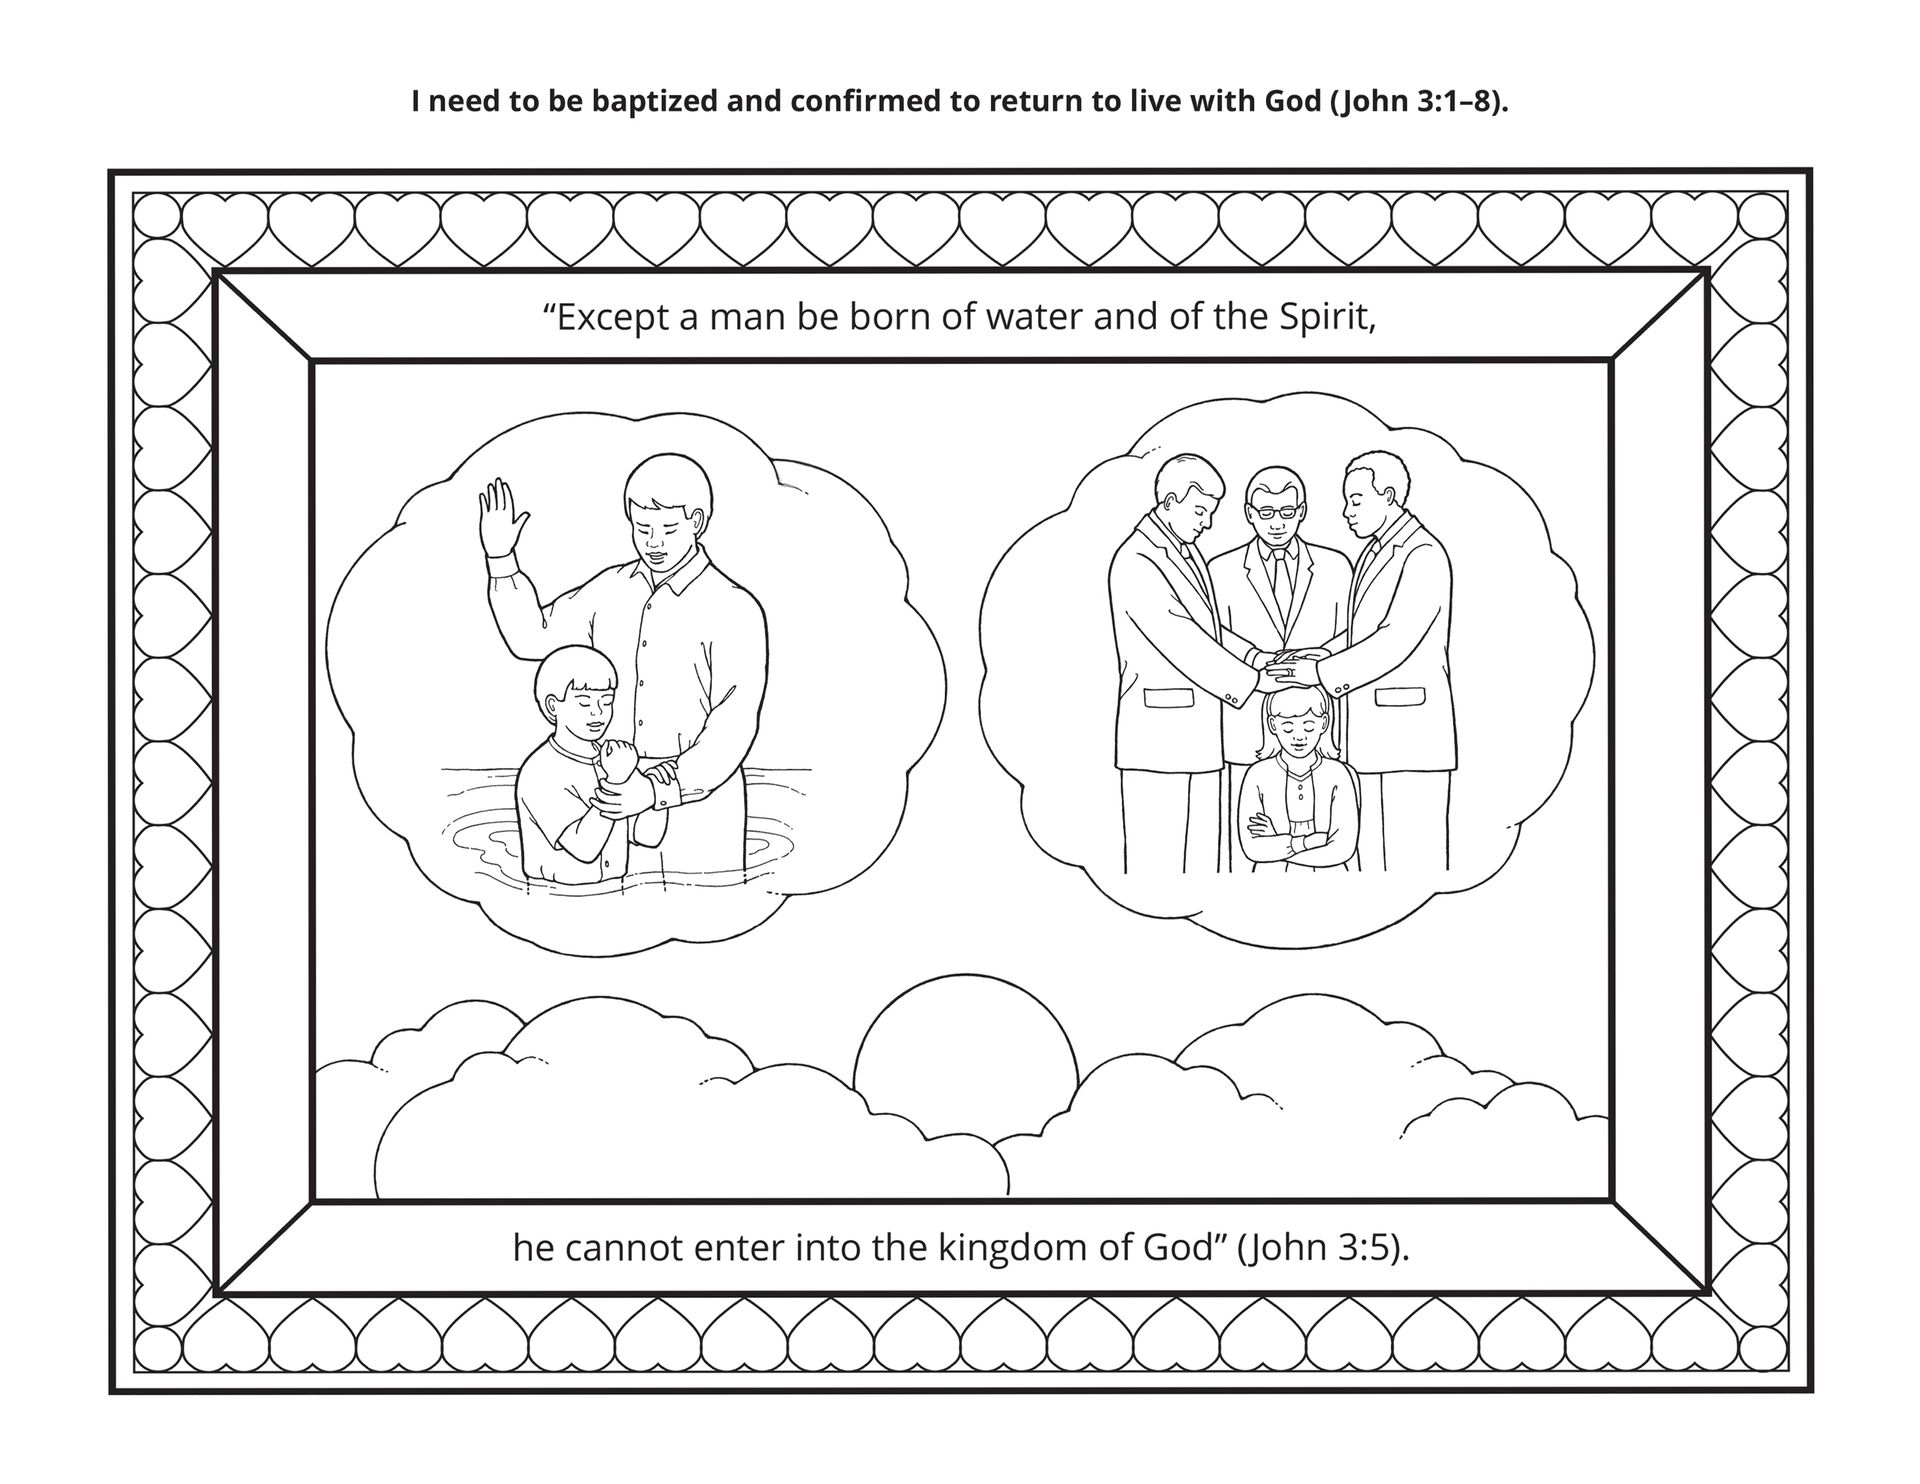 Drawings of baptism and confirmation.